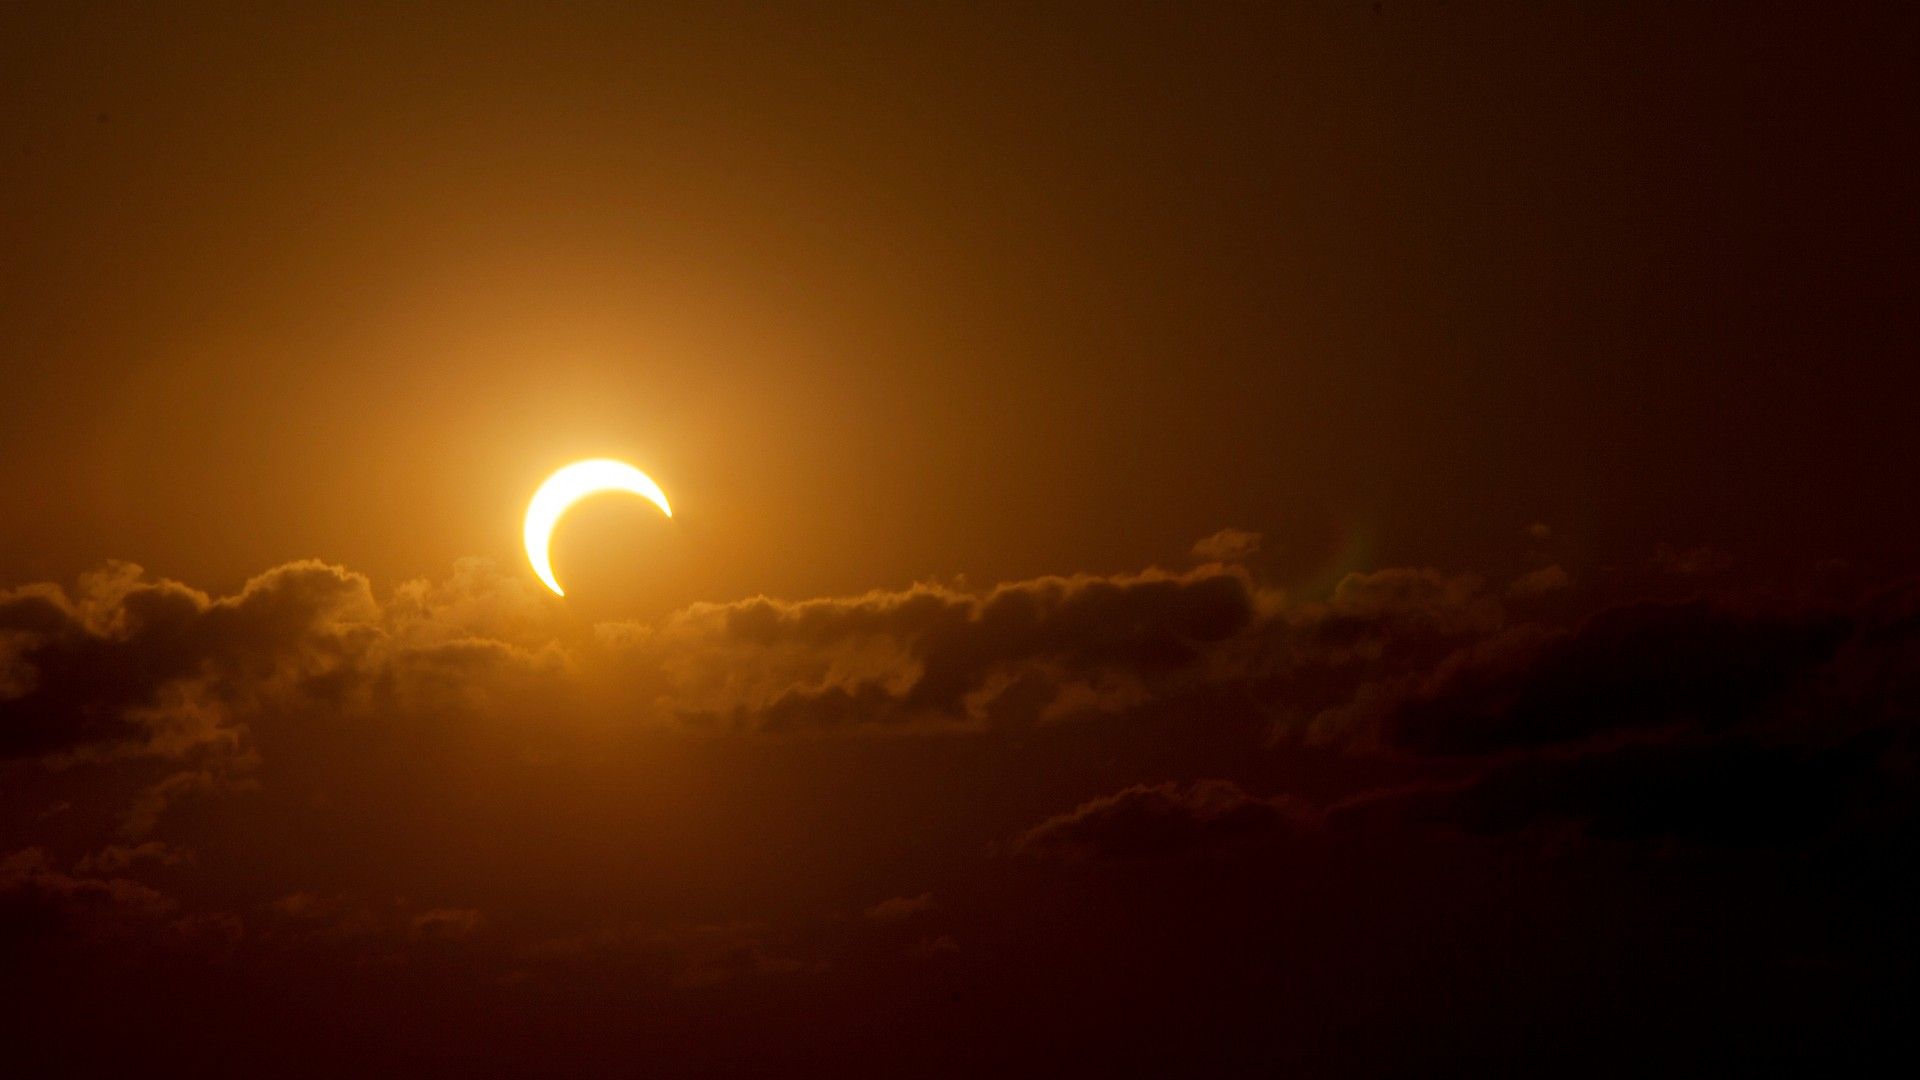 Don't miss the partial solar eclipse today, the last one of 2022 Space